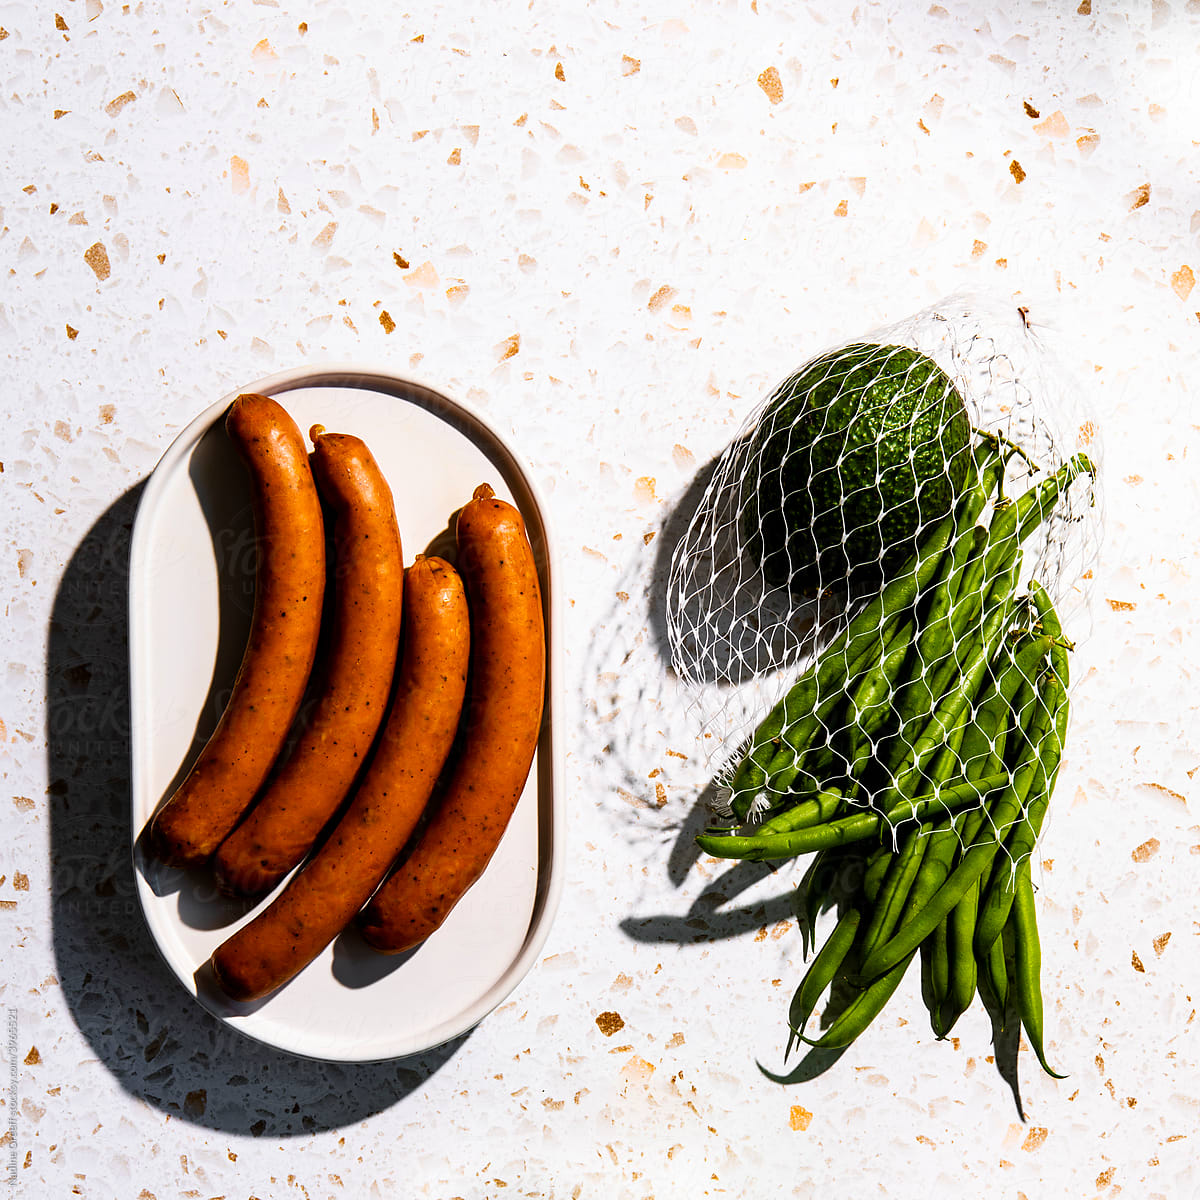 Food on table, sausage and green vegetables